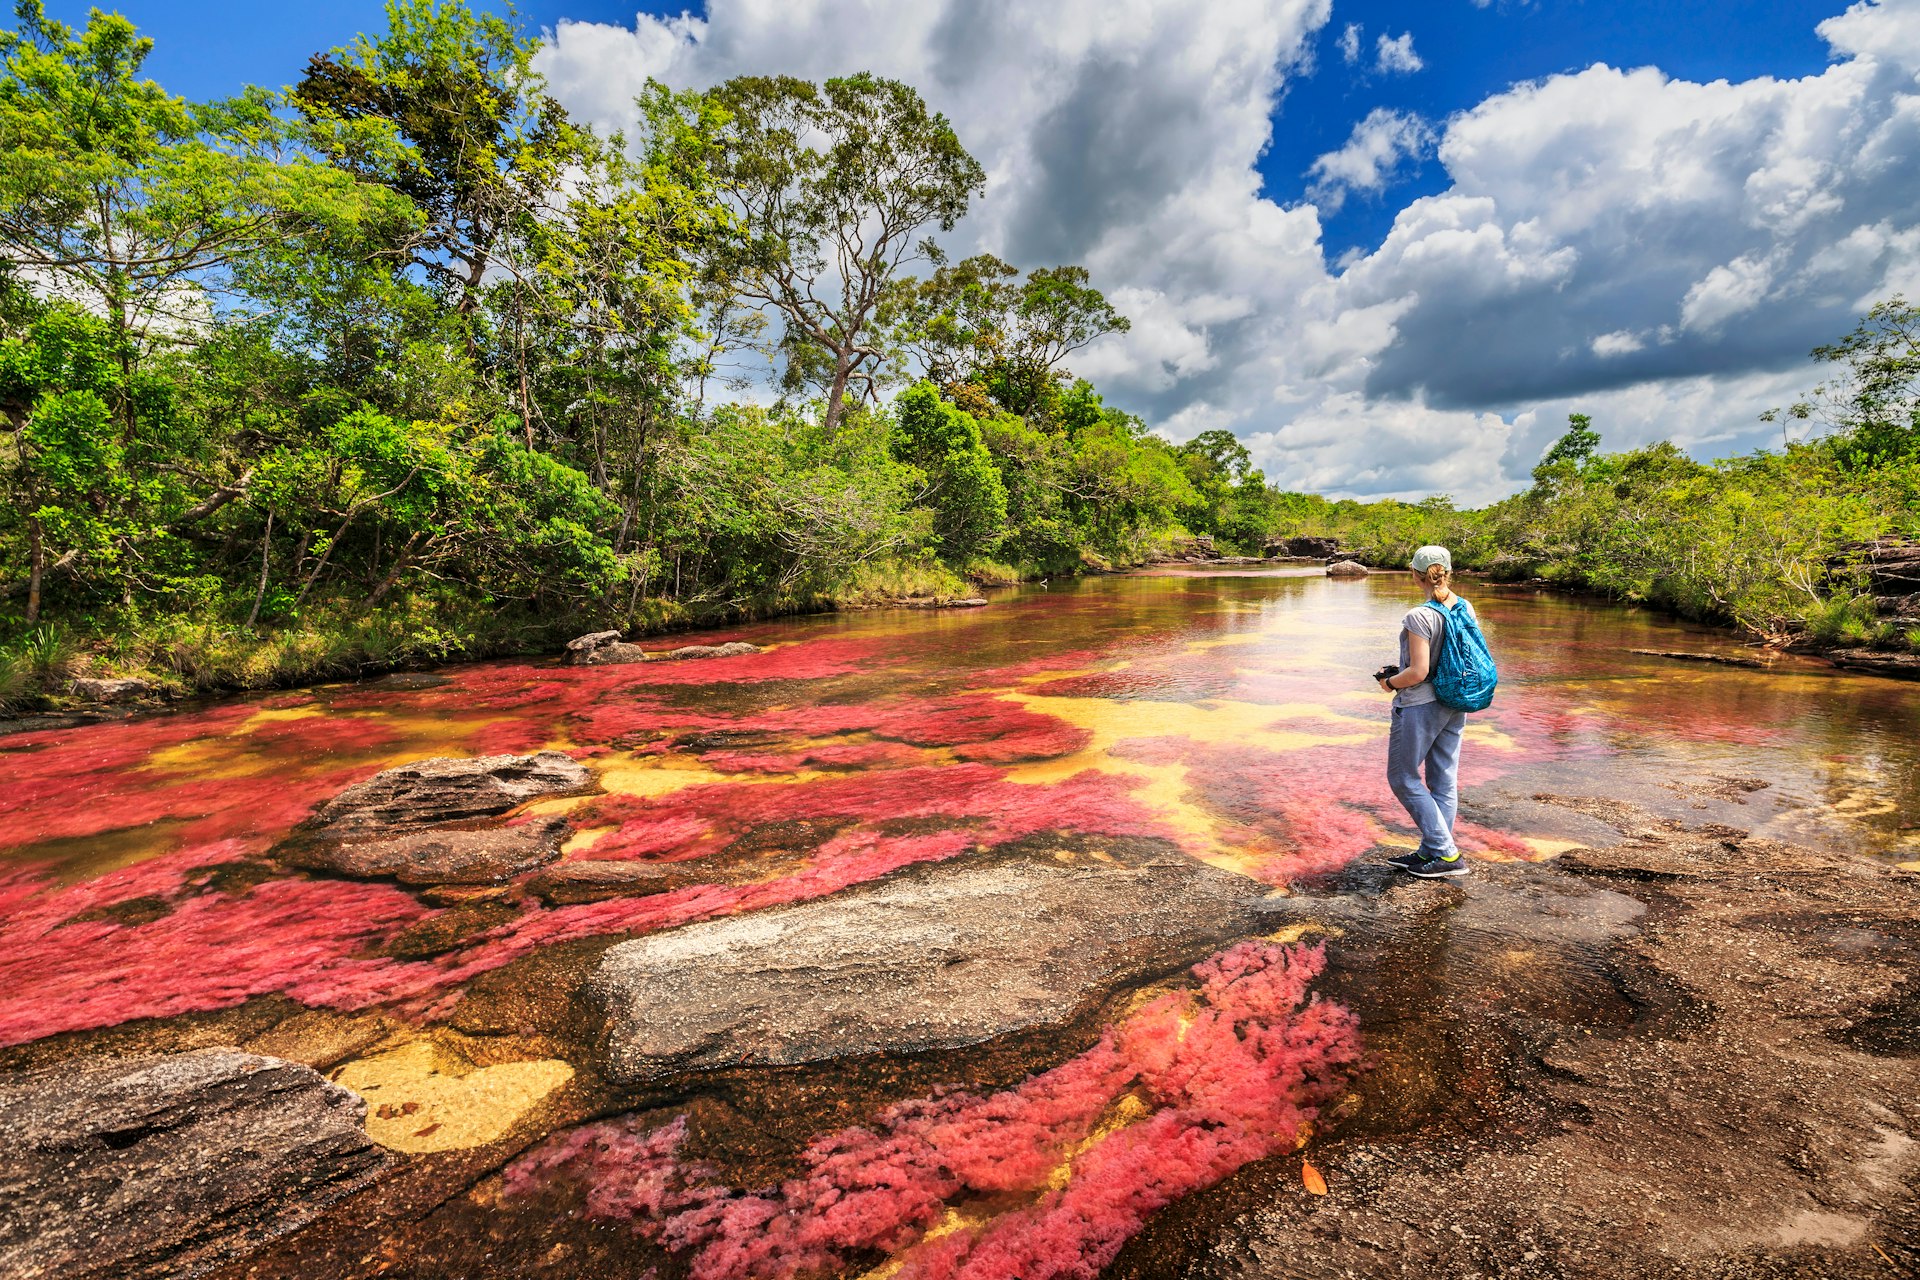 A woman looks out at red and yellow waters of Caño Cristales, La Macarena, Meta, Colombia